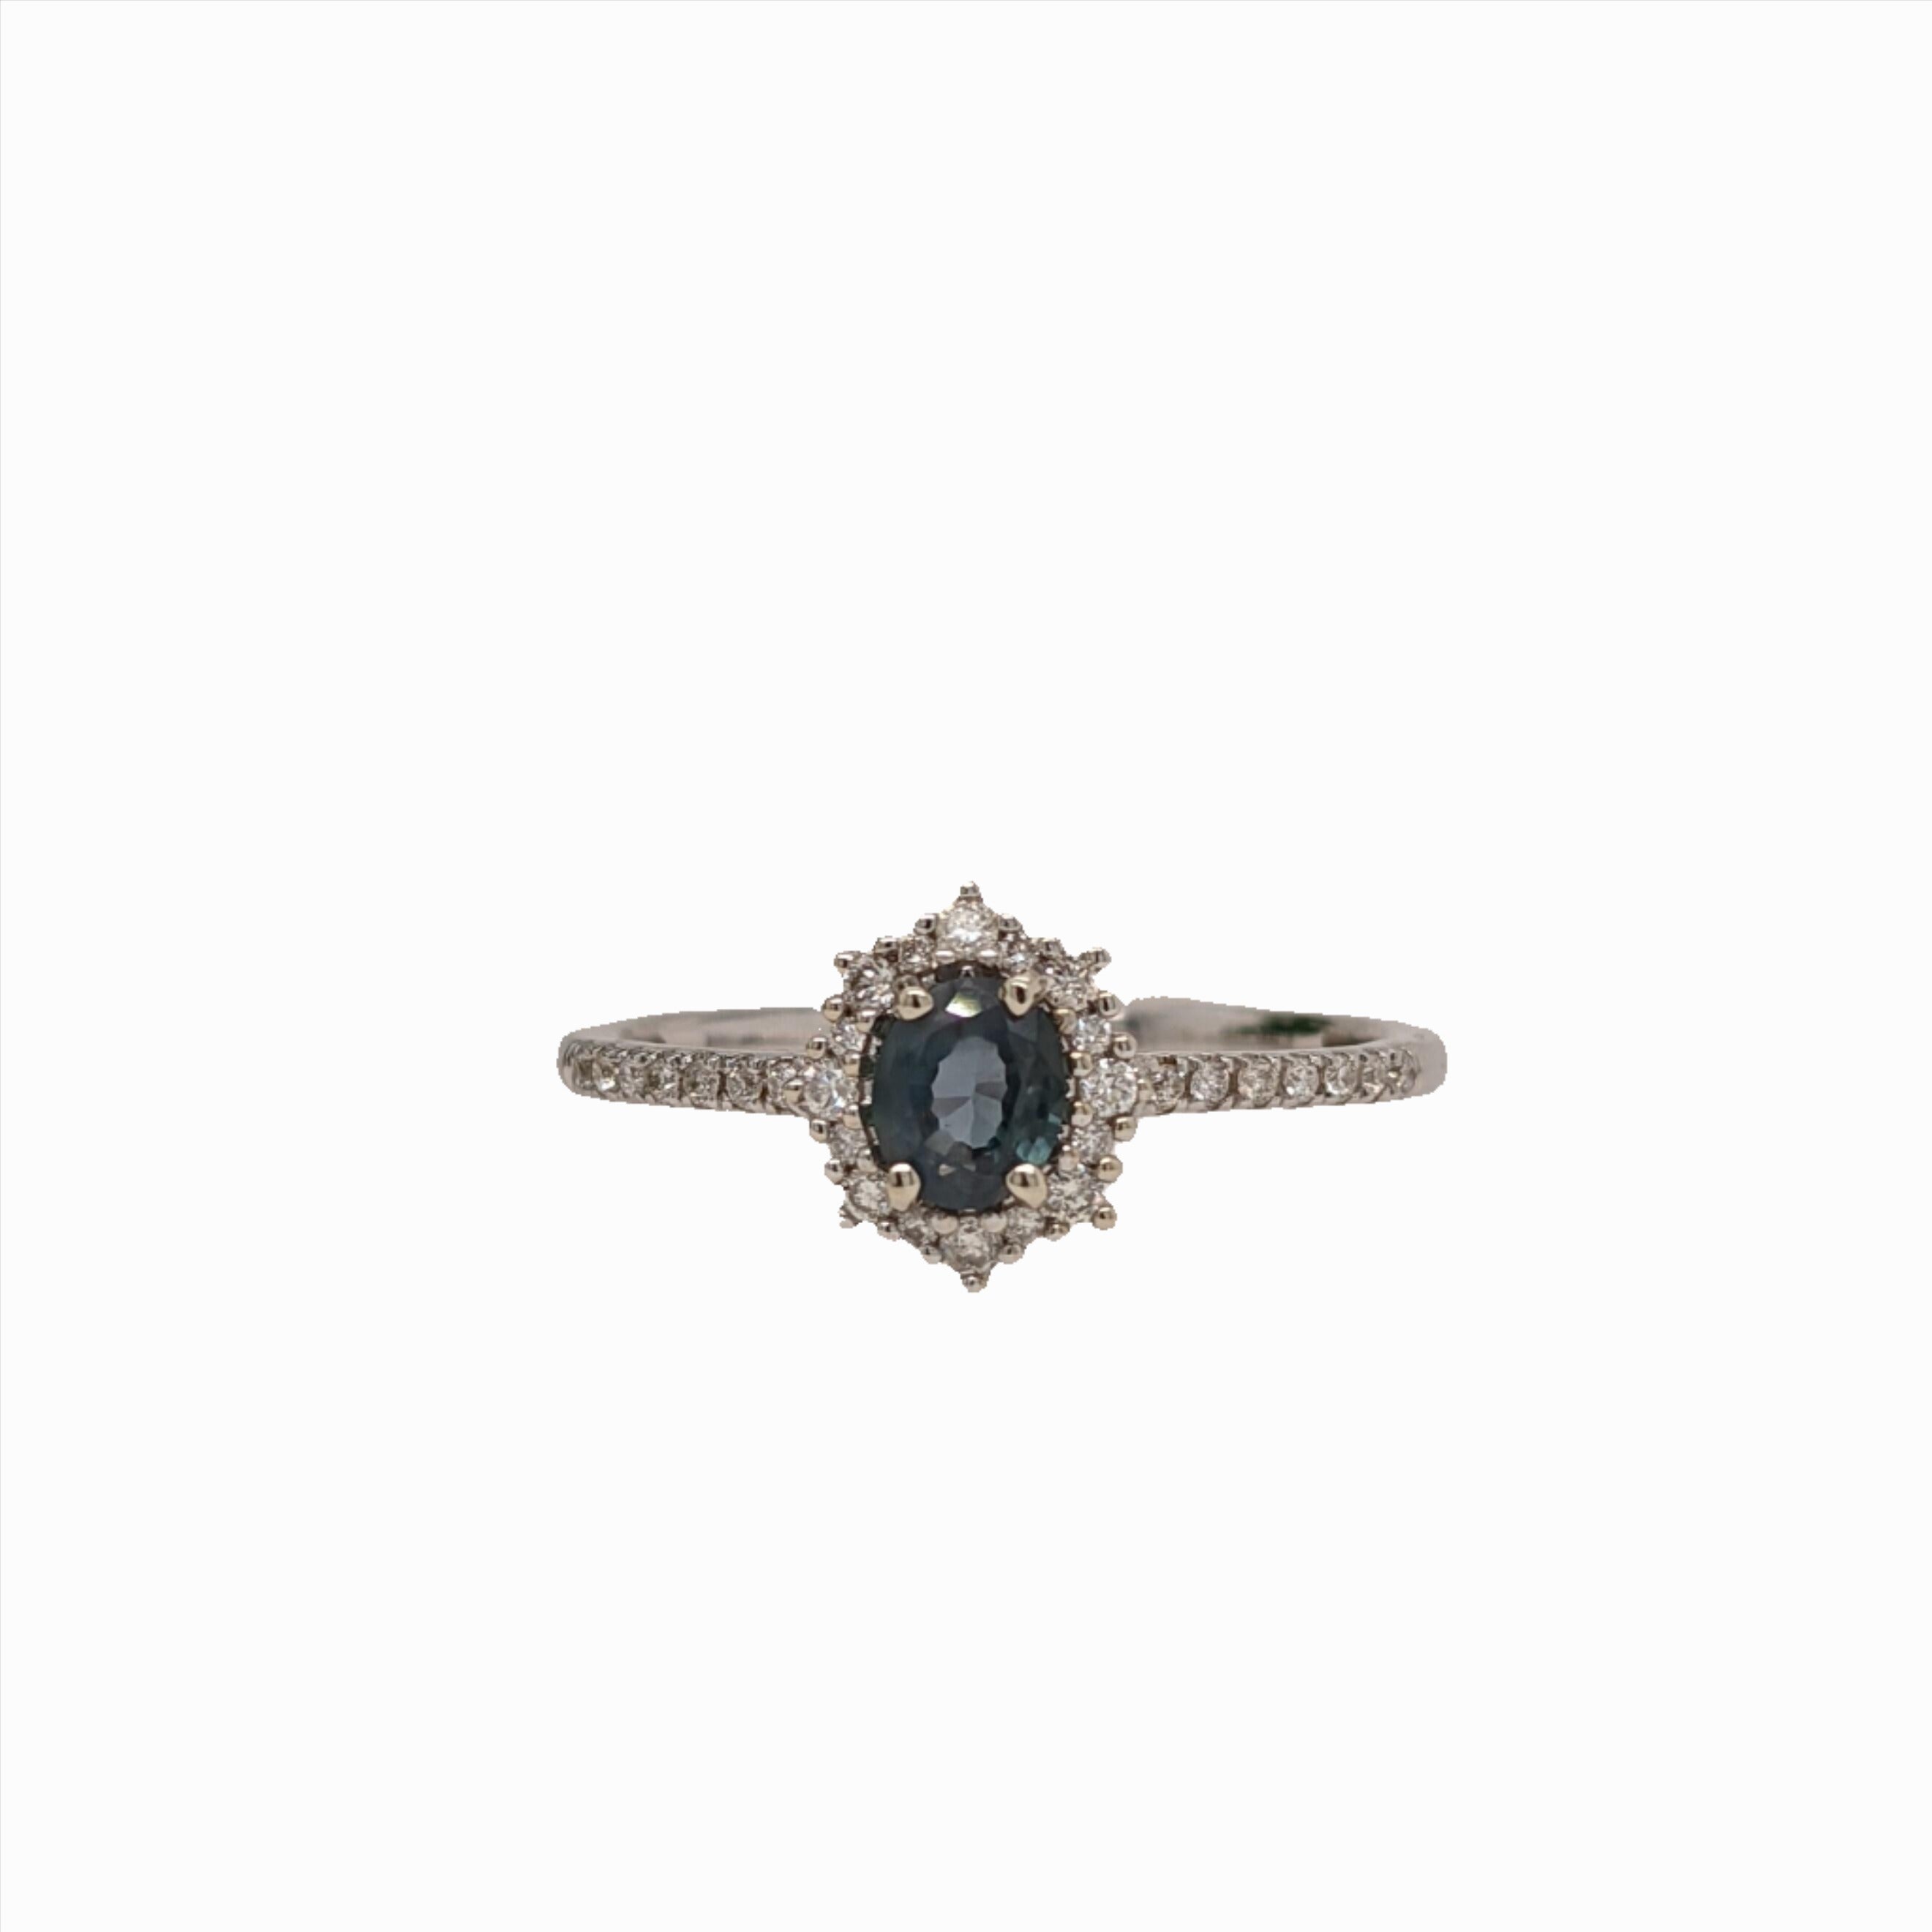 Natural Alexandrite Ring w Diamond Halo in Solid 14k White Gold Oval 5x3.5mm